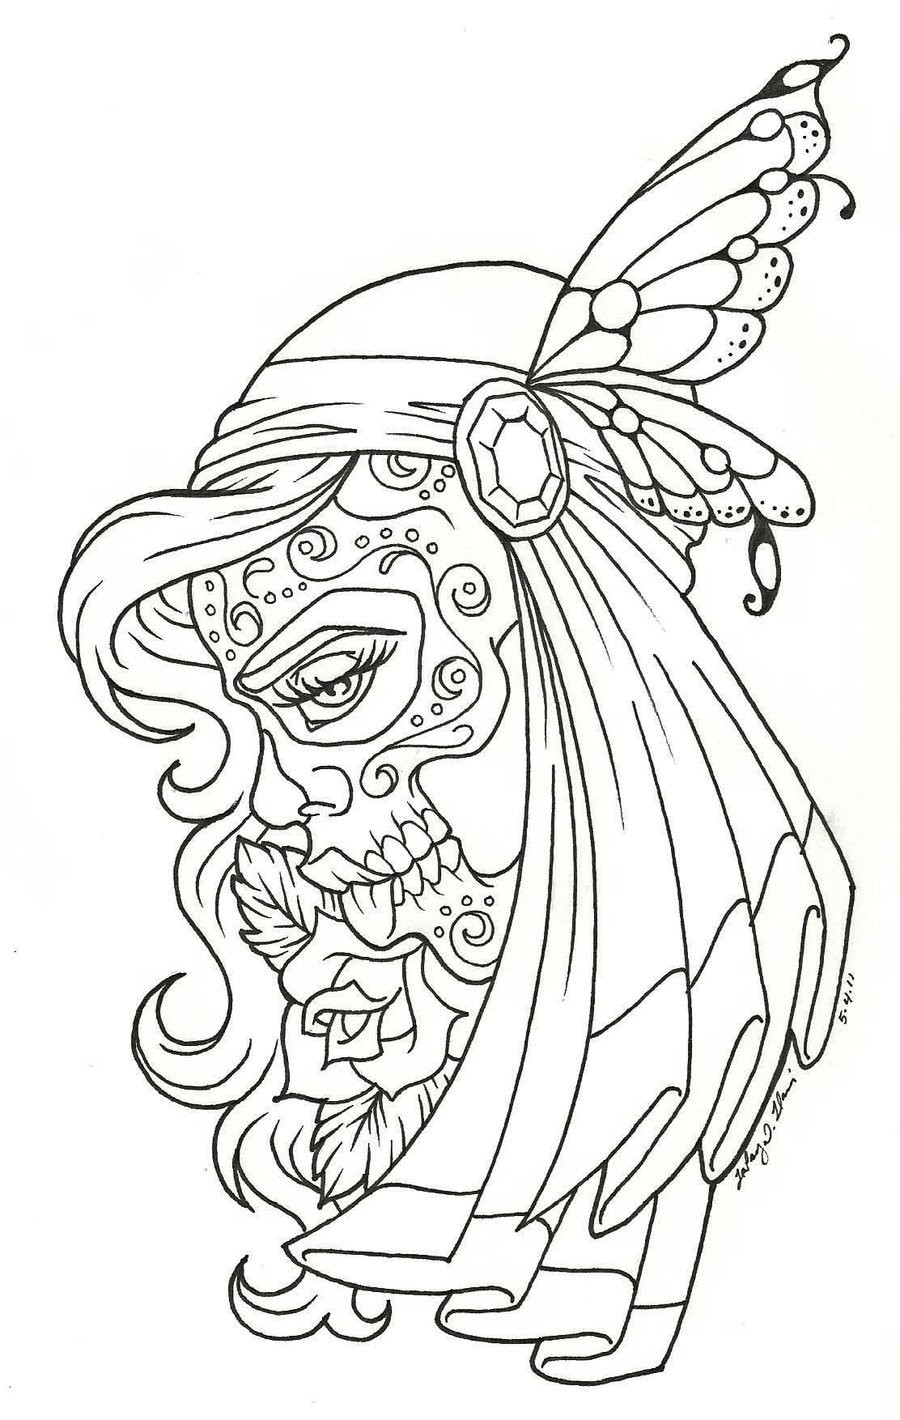 Coloring Pages Free Printable
 Free Printable Day of the Dead Coloring Pages Best